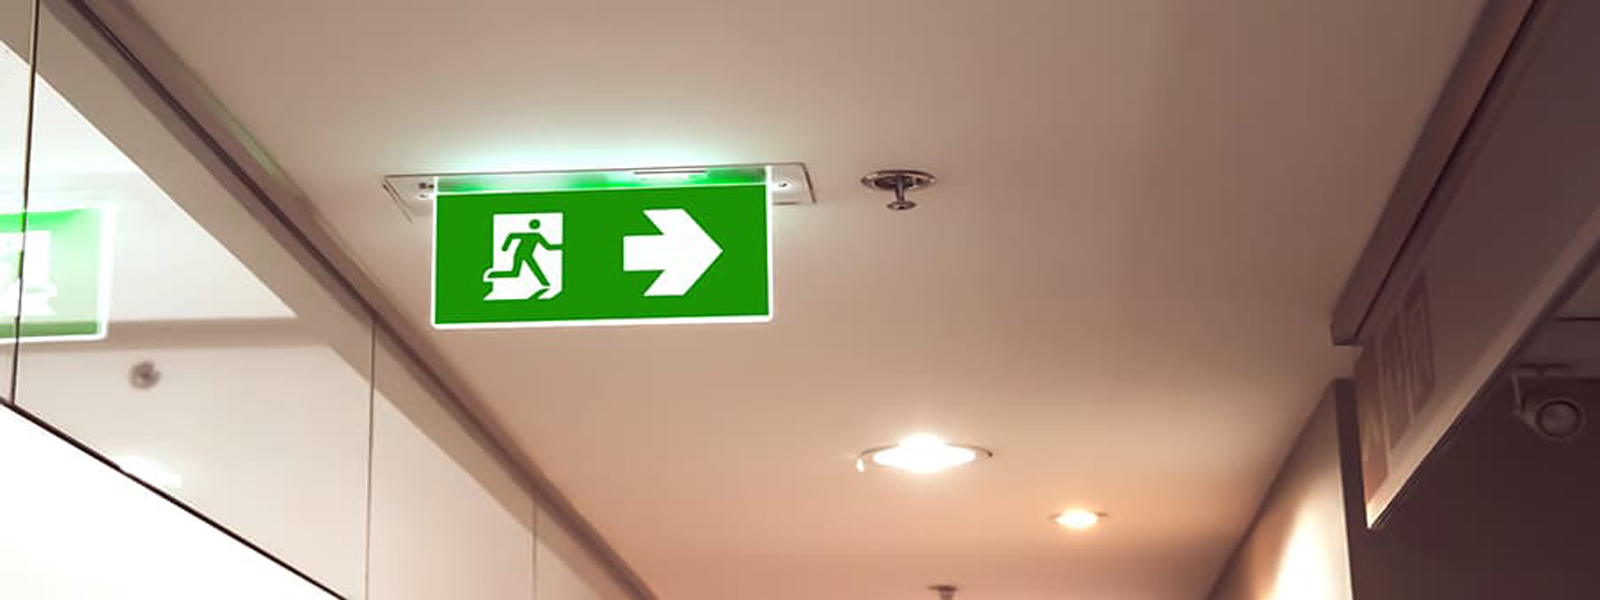 emergency exit light dealers in chennai